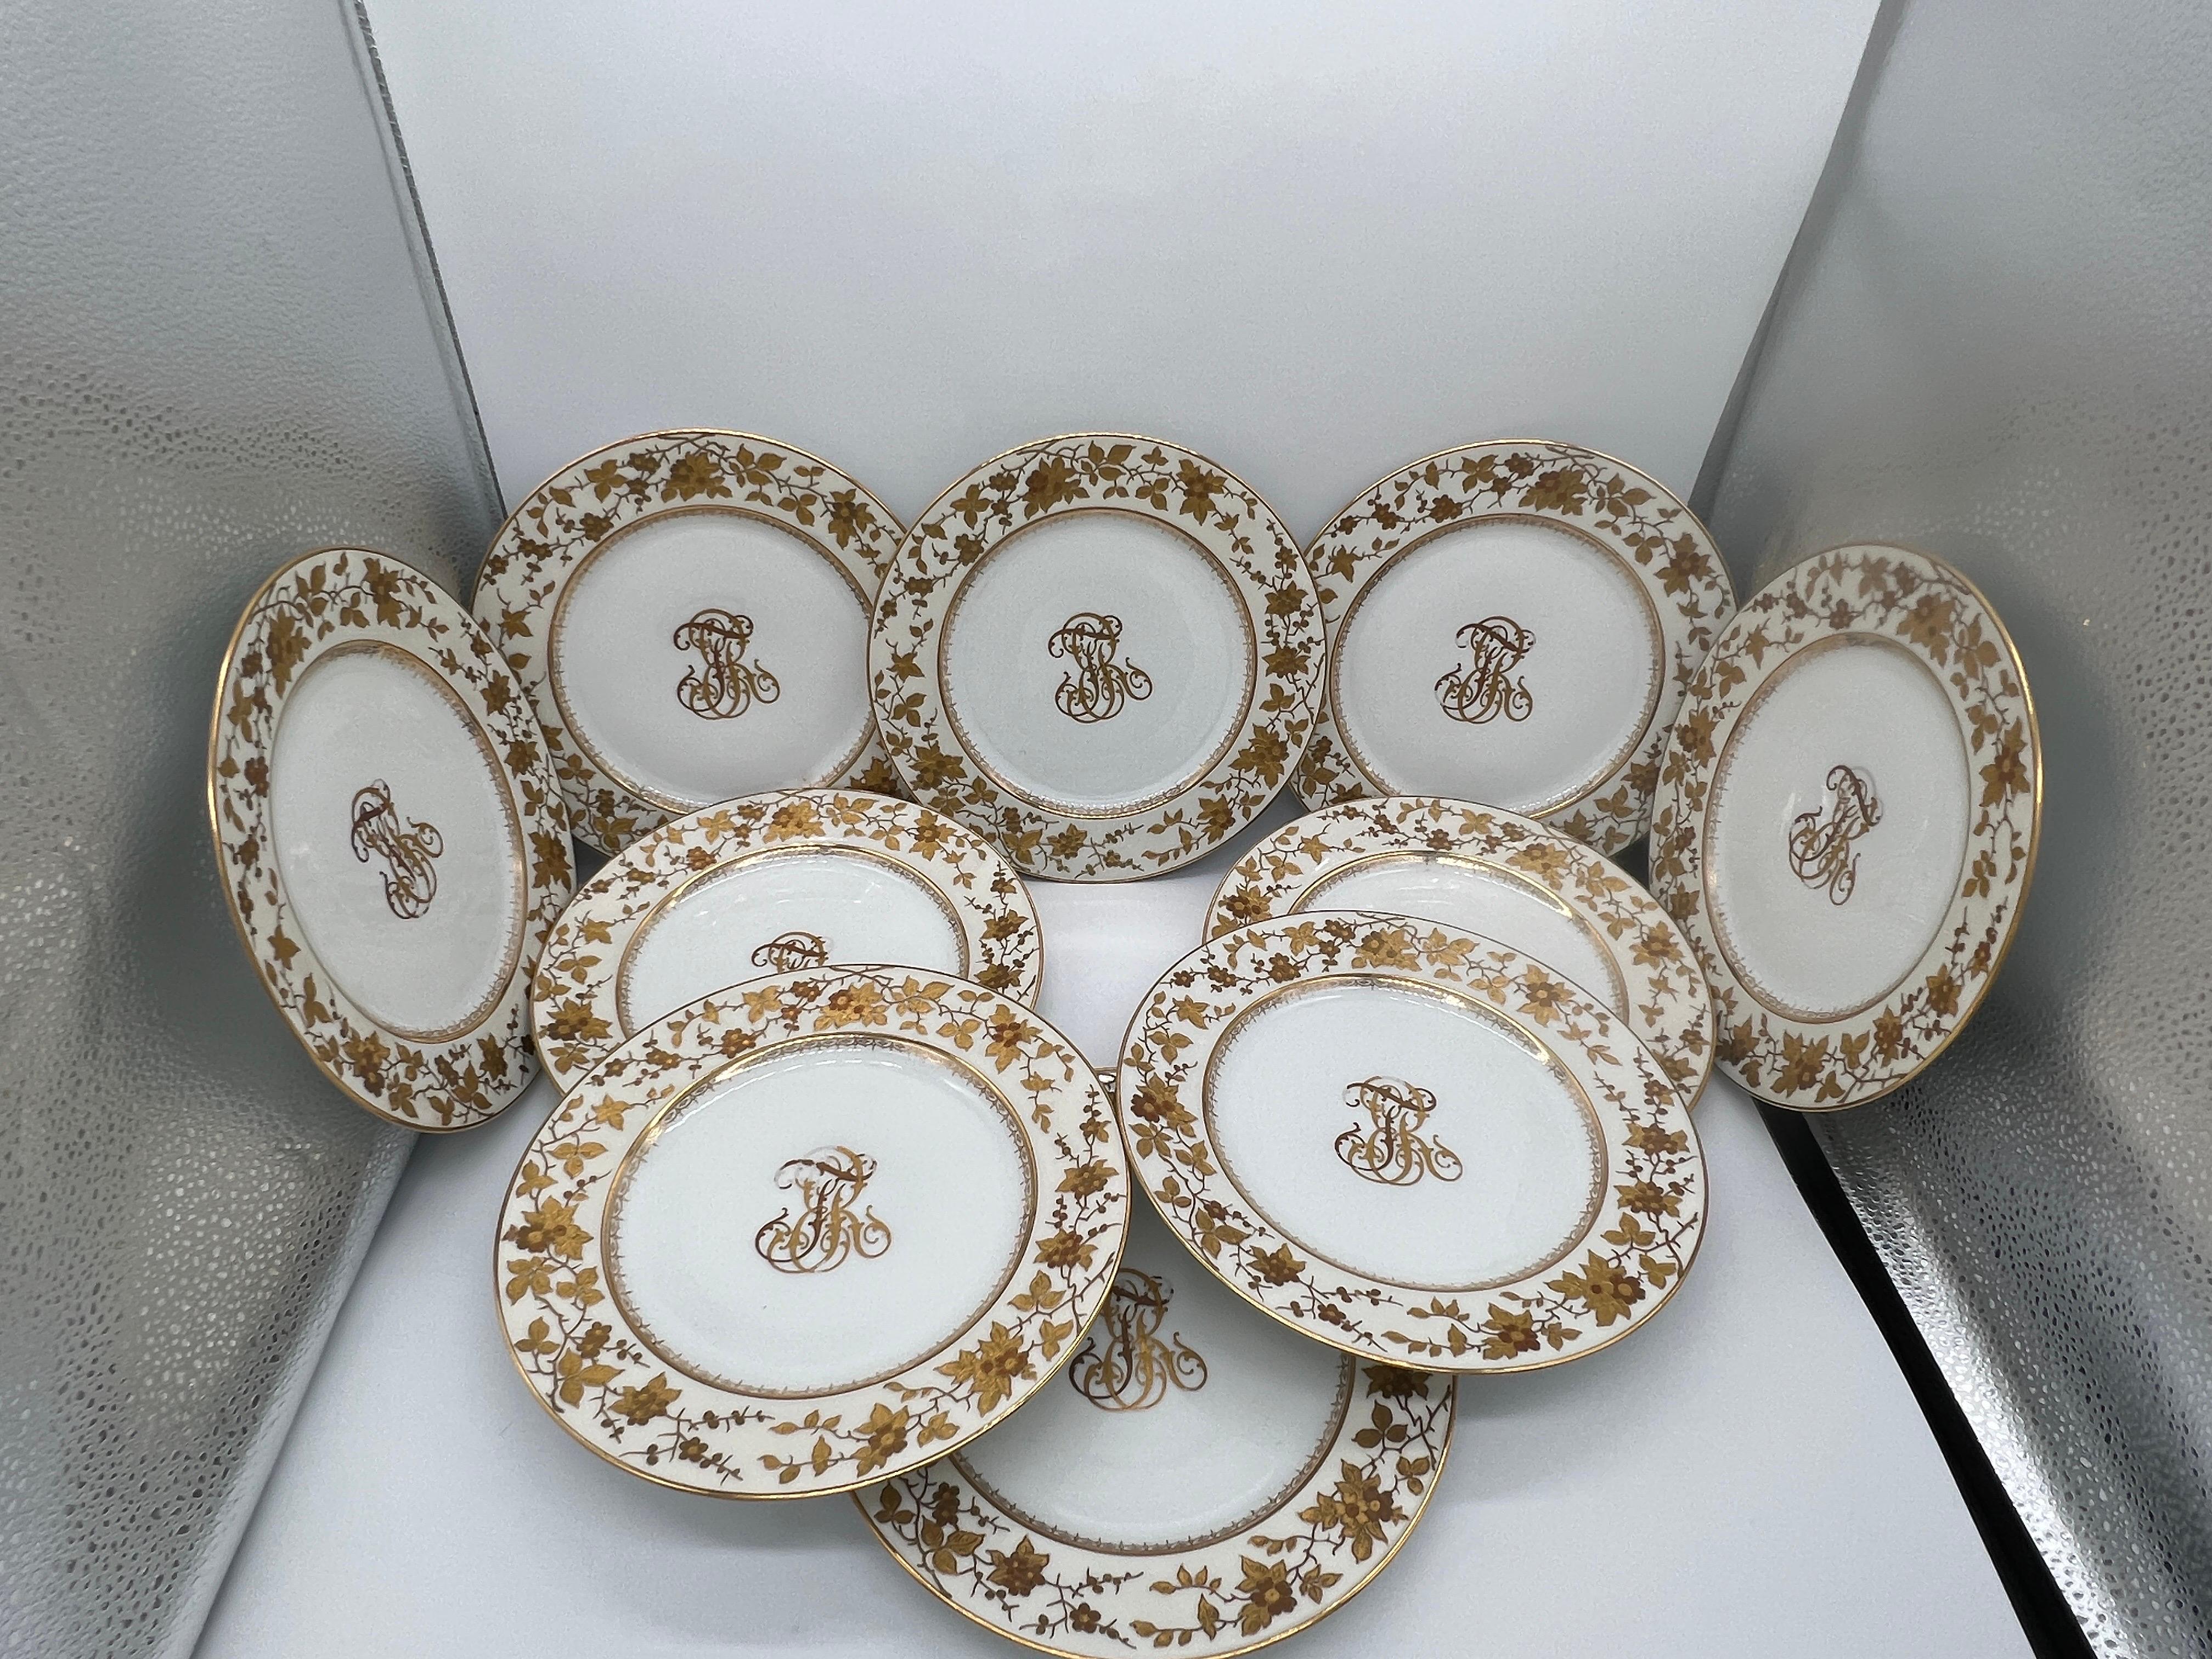 Fischer & Mieg Pirkenhammer (German, 19th century). 
A set of 10 stunning porcelain dinner plates. Each plate is overly decorated with daisy floral and vines to rim and a geometric form to inner border. Center of plate has Monogram to each. Marked